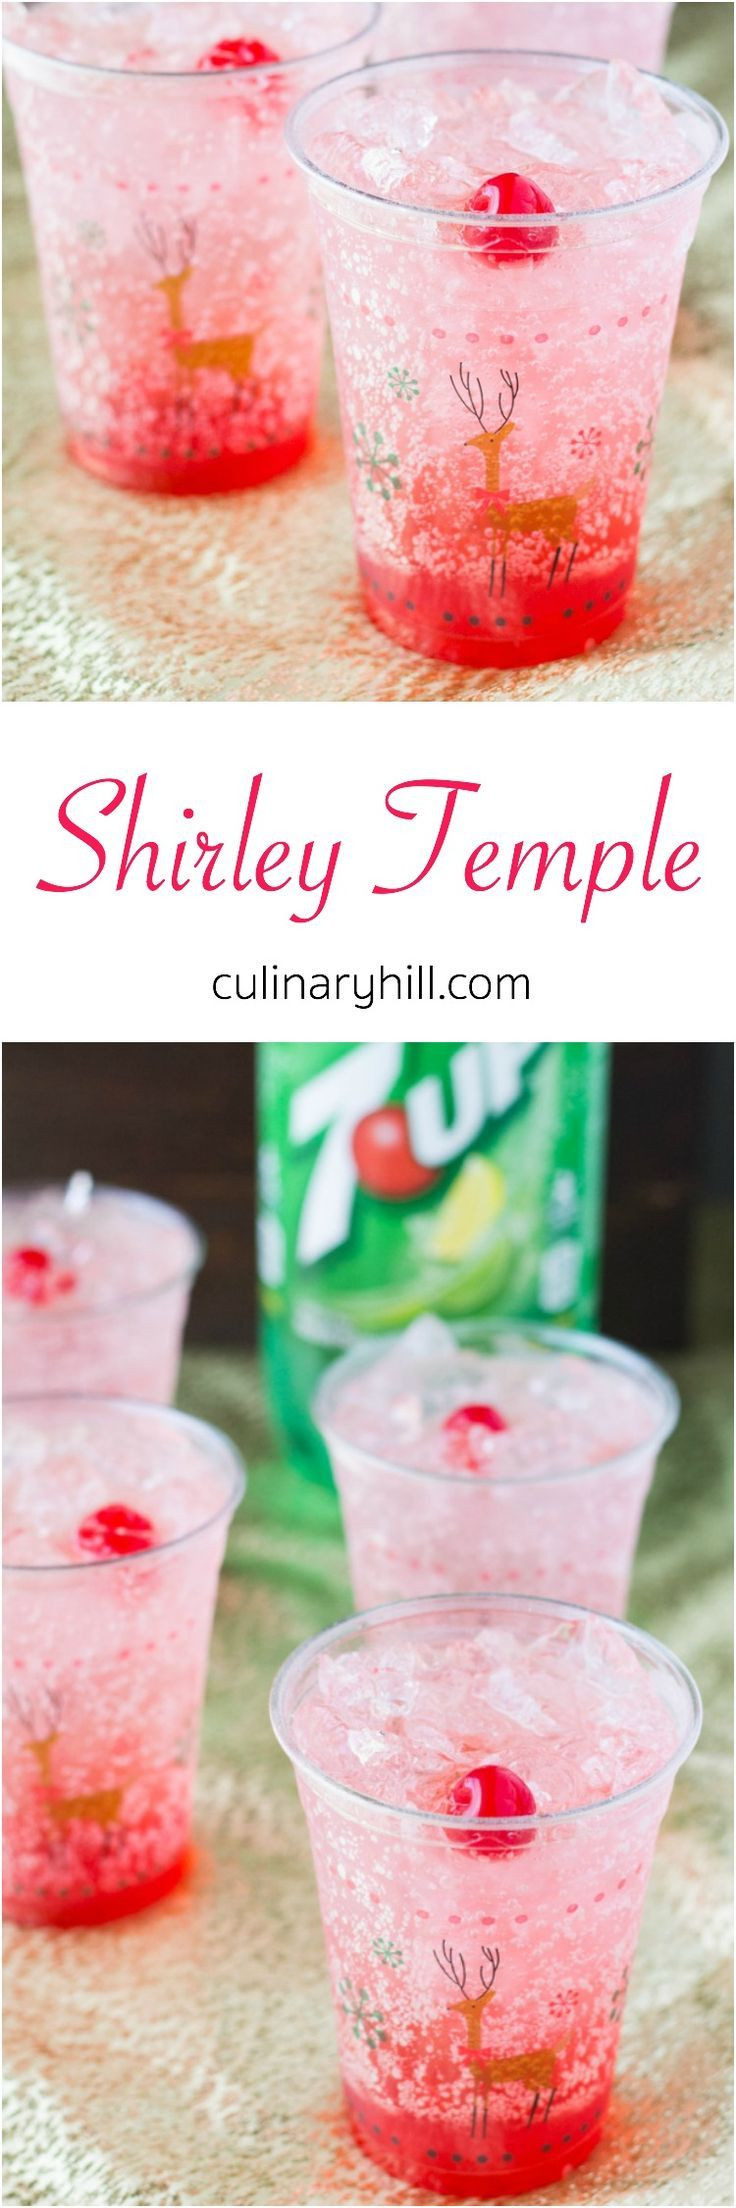 Holiday Party Drink Ideas
 Shirley Temple Recipe